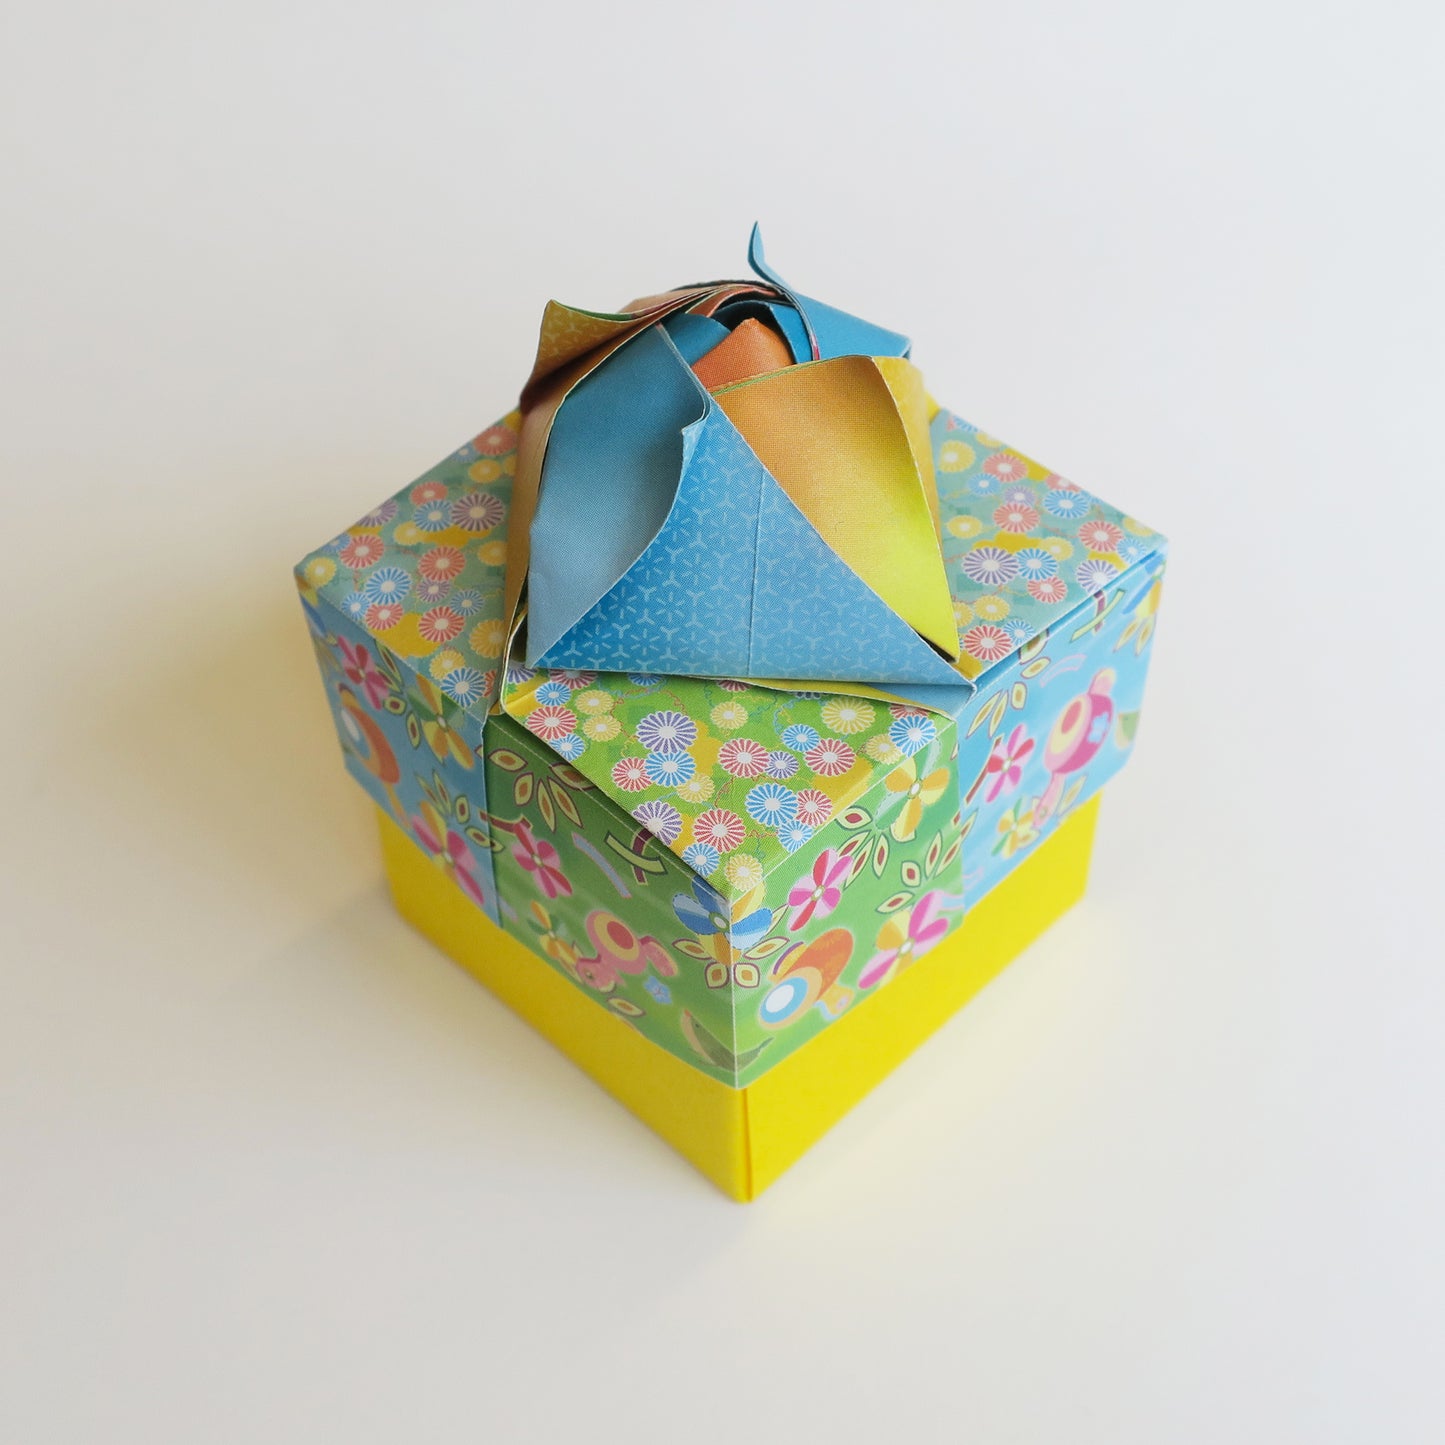 Trinket Origami, Make 5 Different Origami Boxes, 15x15cm